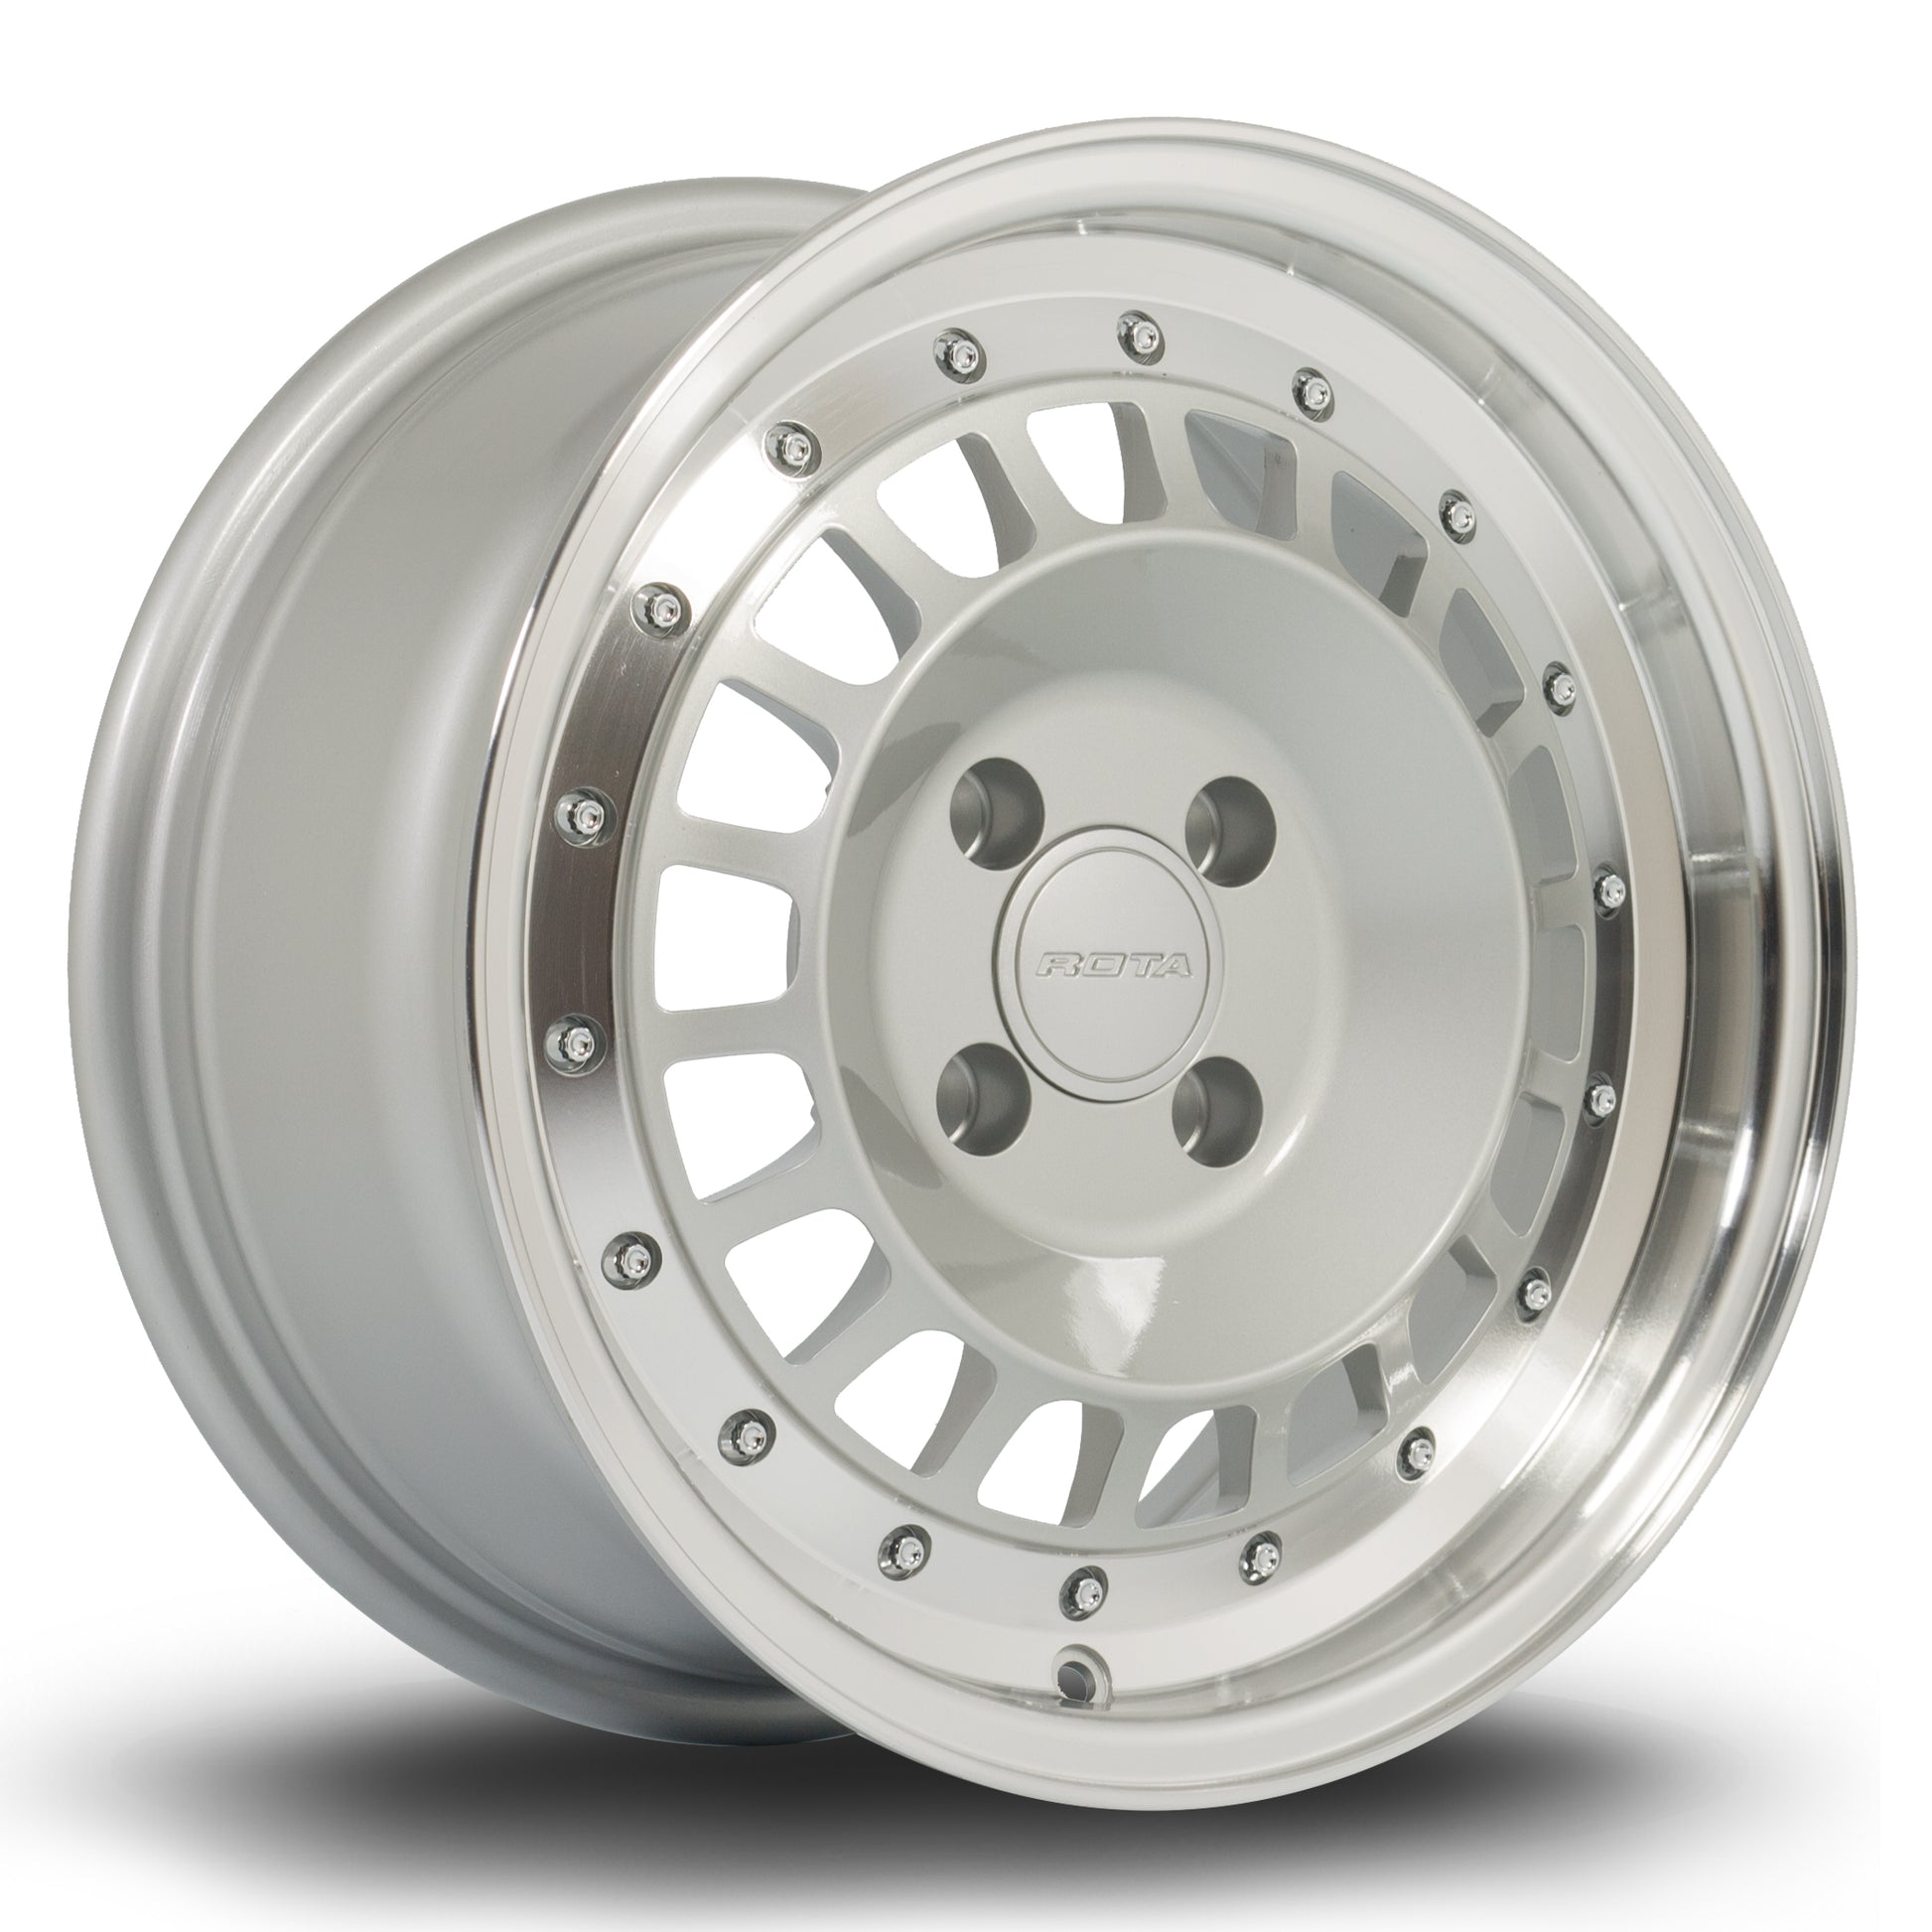 Rota Speciale, 15 x 7 inch, 4108 PCD, ET20 in Satin Silver with Polished Lip Single Rim - Rotashop